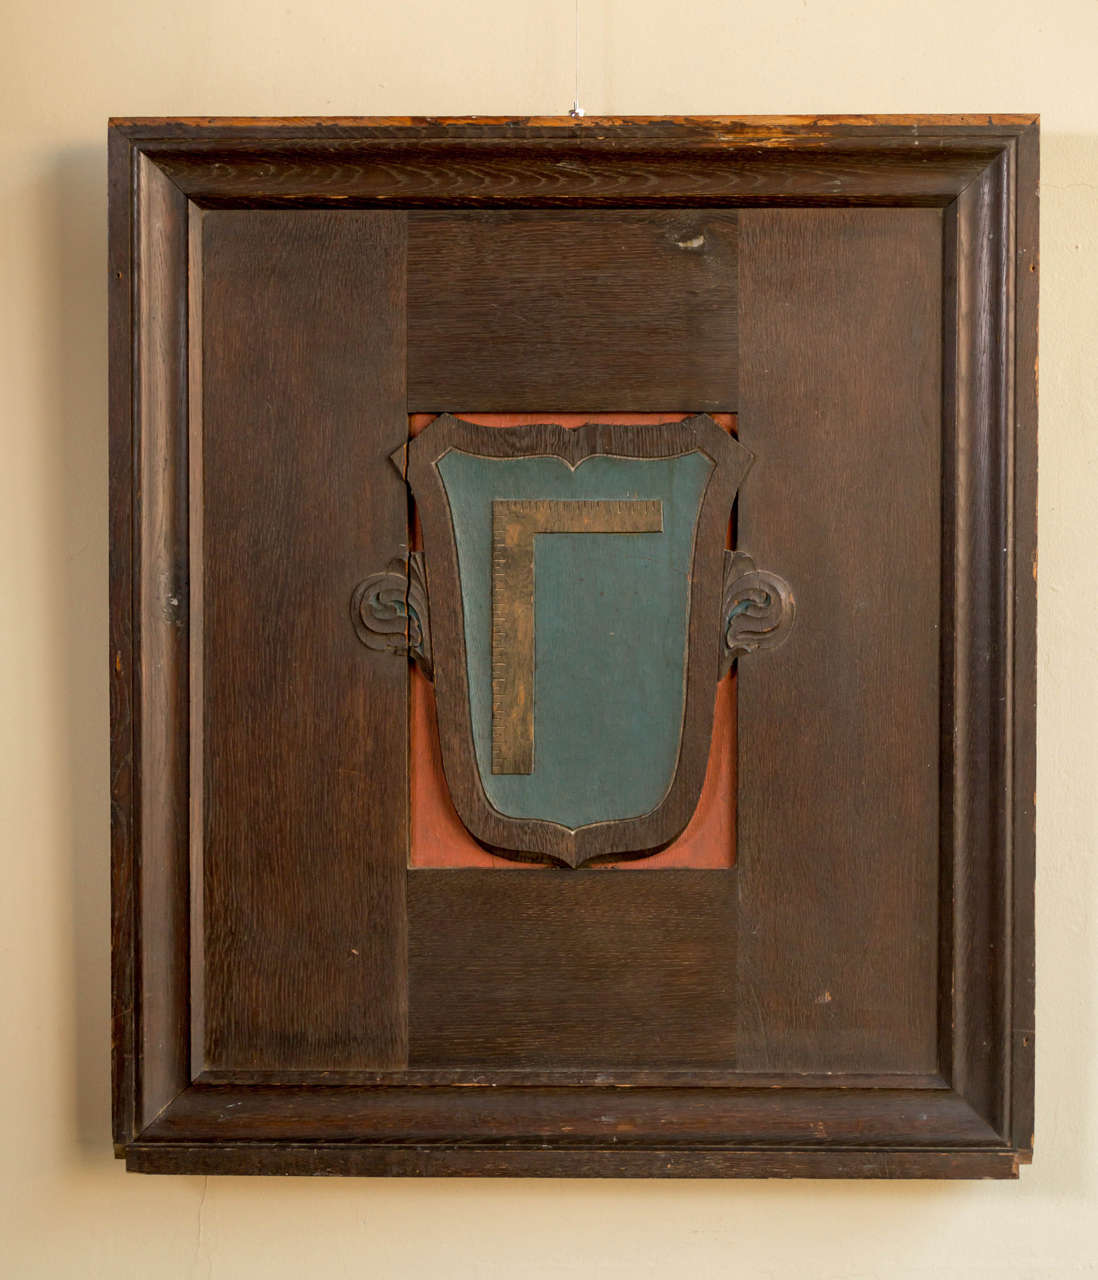 A handsome early 20th century carved and decorated oak panel from an undetermined Masonic temple or lodge.